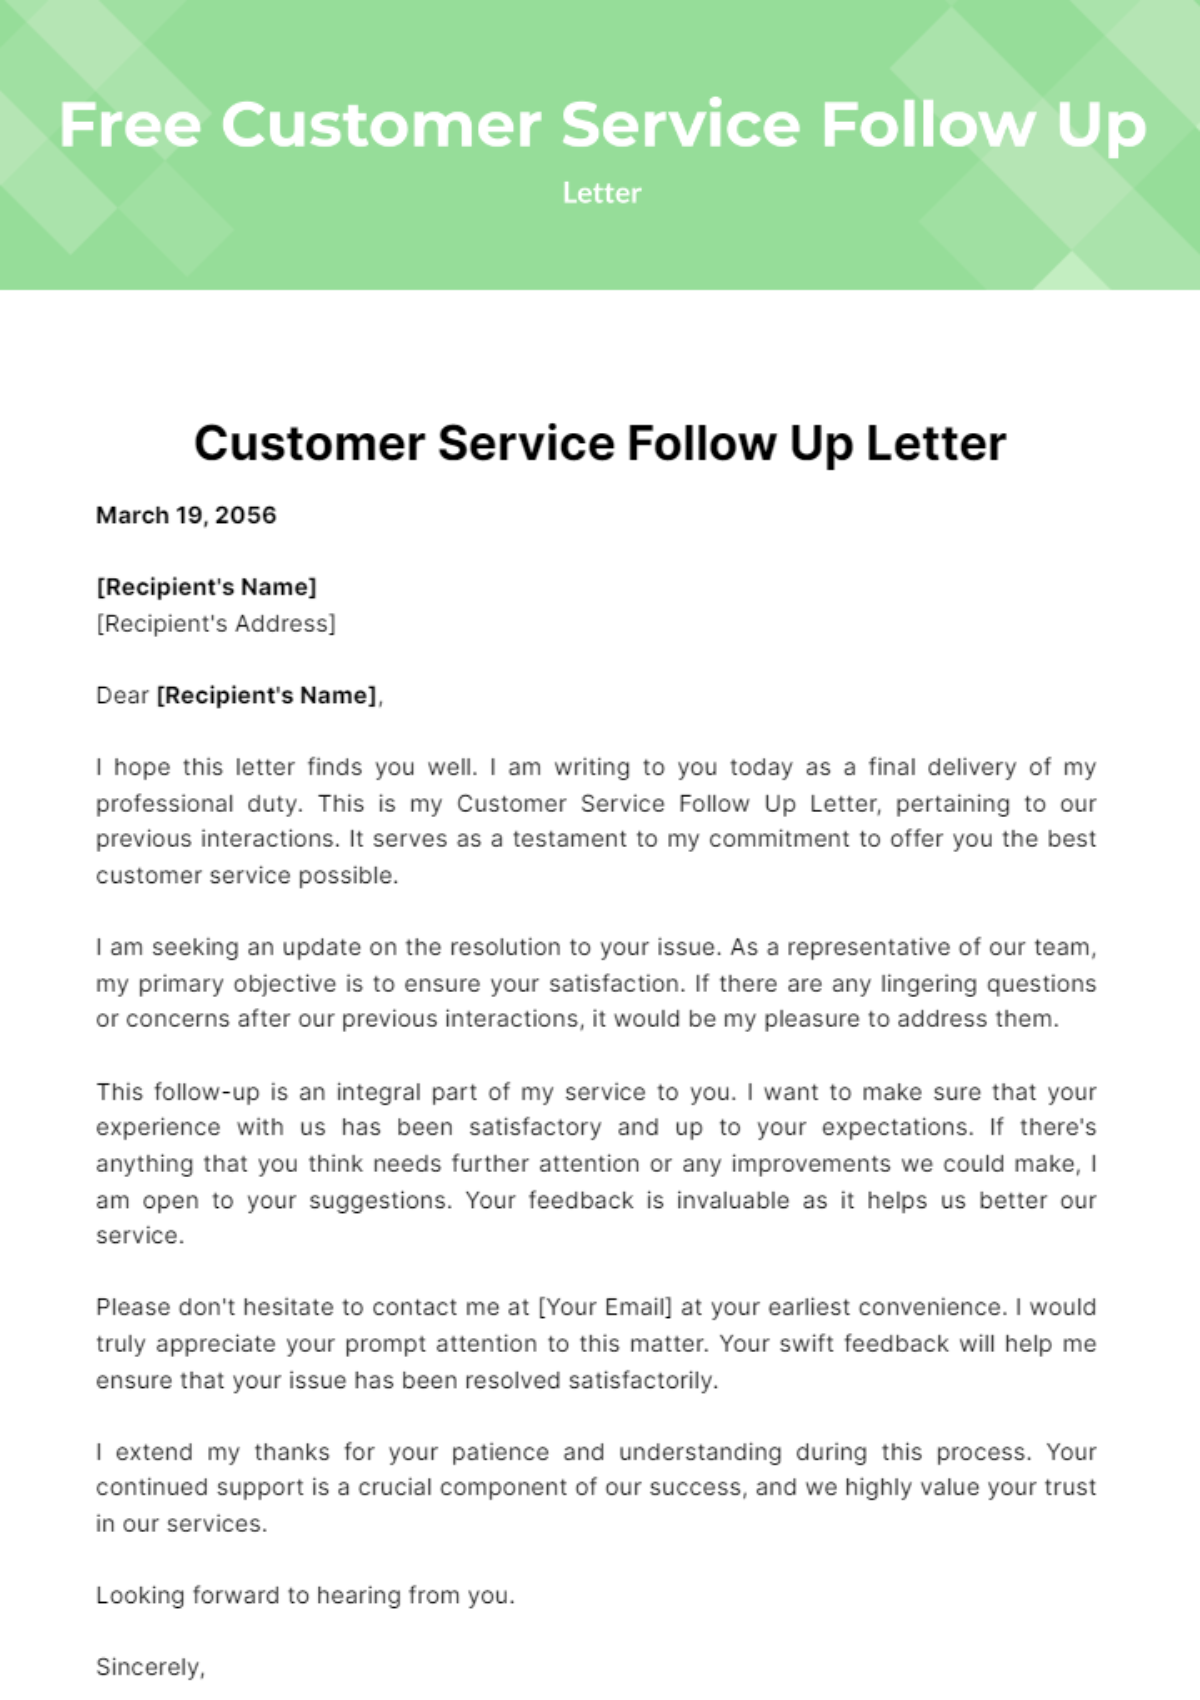 Free Customer Service Follow Up Letter Template